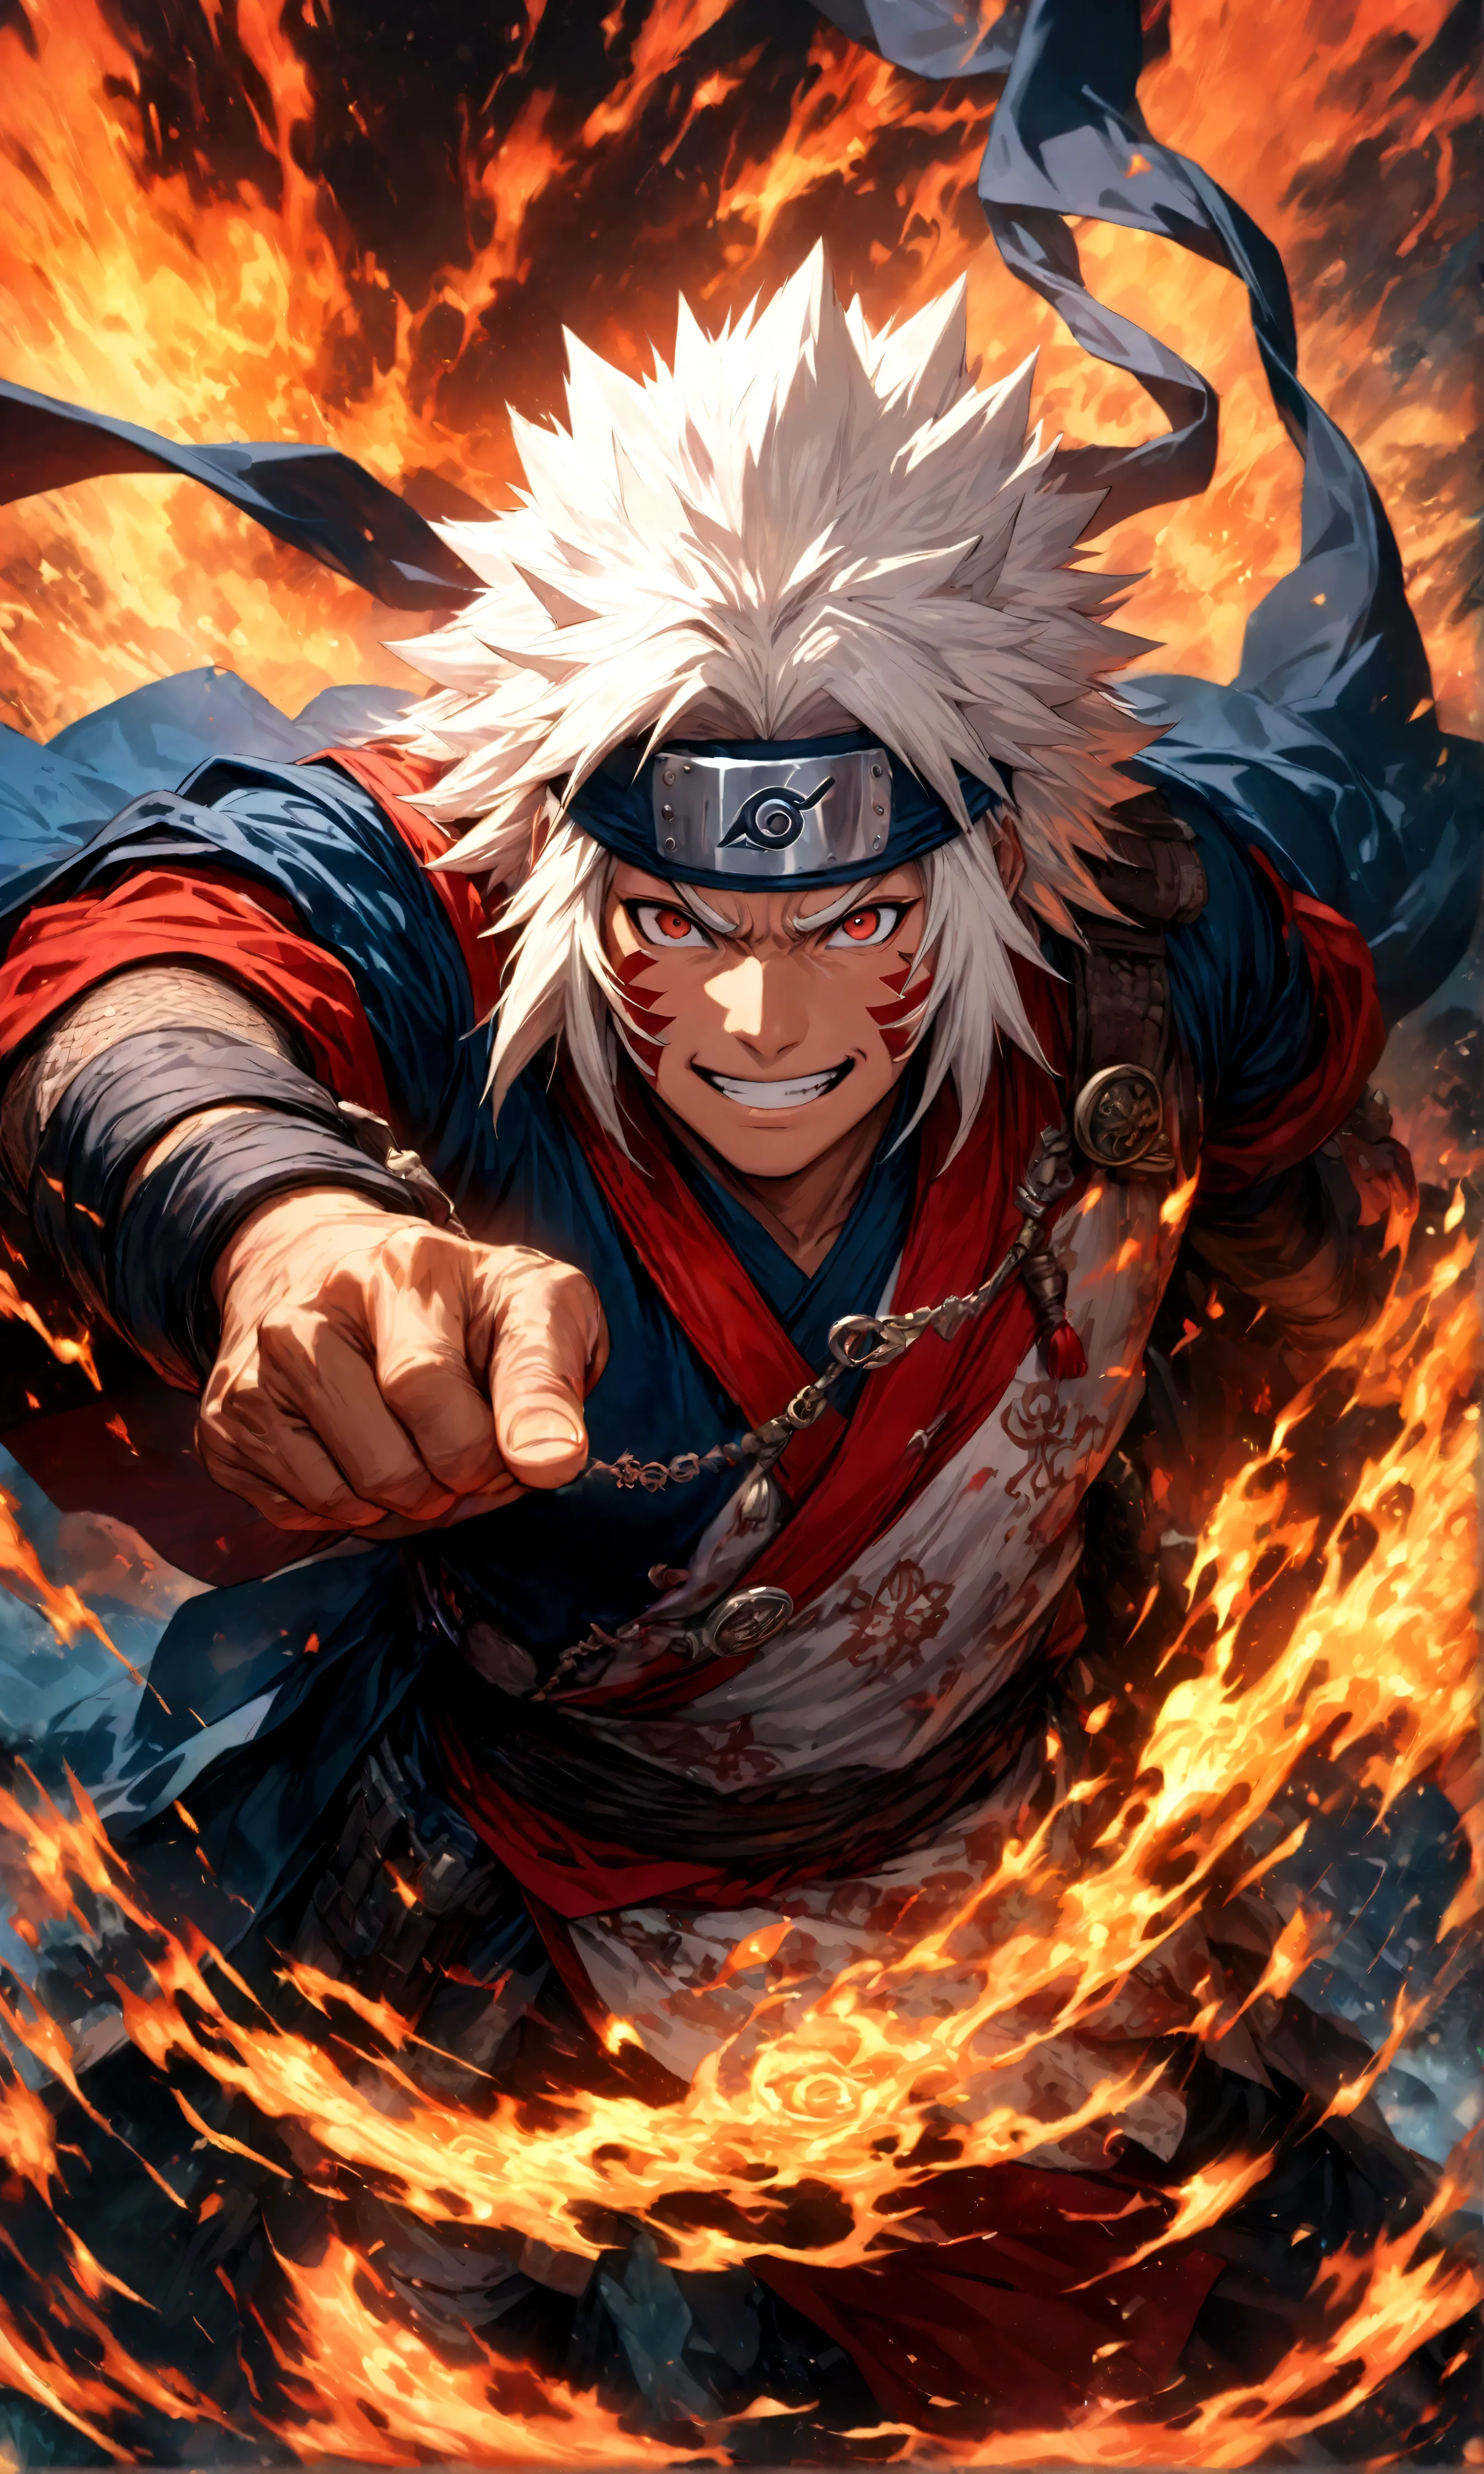 Fixes,(1 middle-aged male,Jiraiya),comics『Naruto』Characters,Unfolded Scroll,Use of magic,Fighting Style,Sarcastic smile,Magical ...